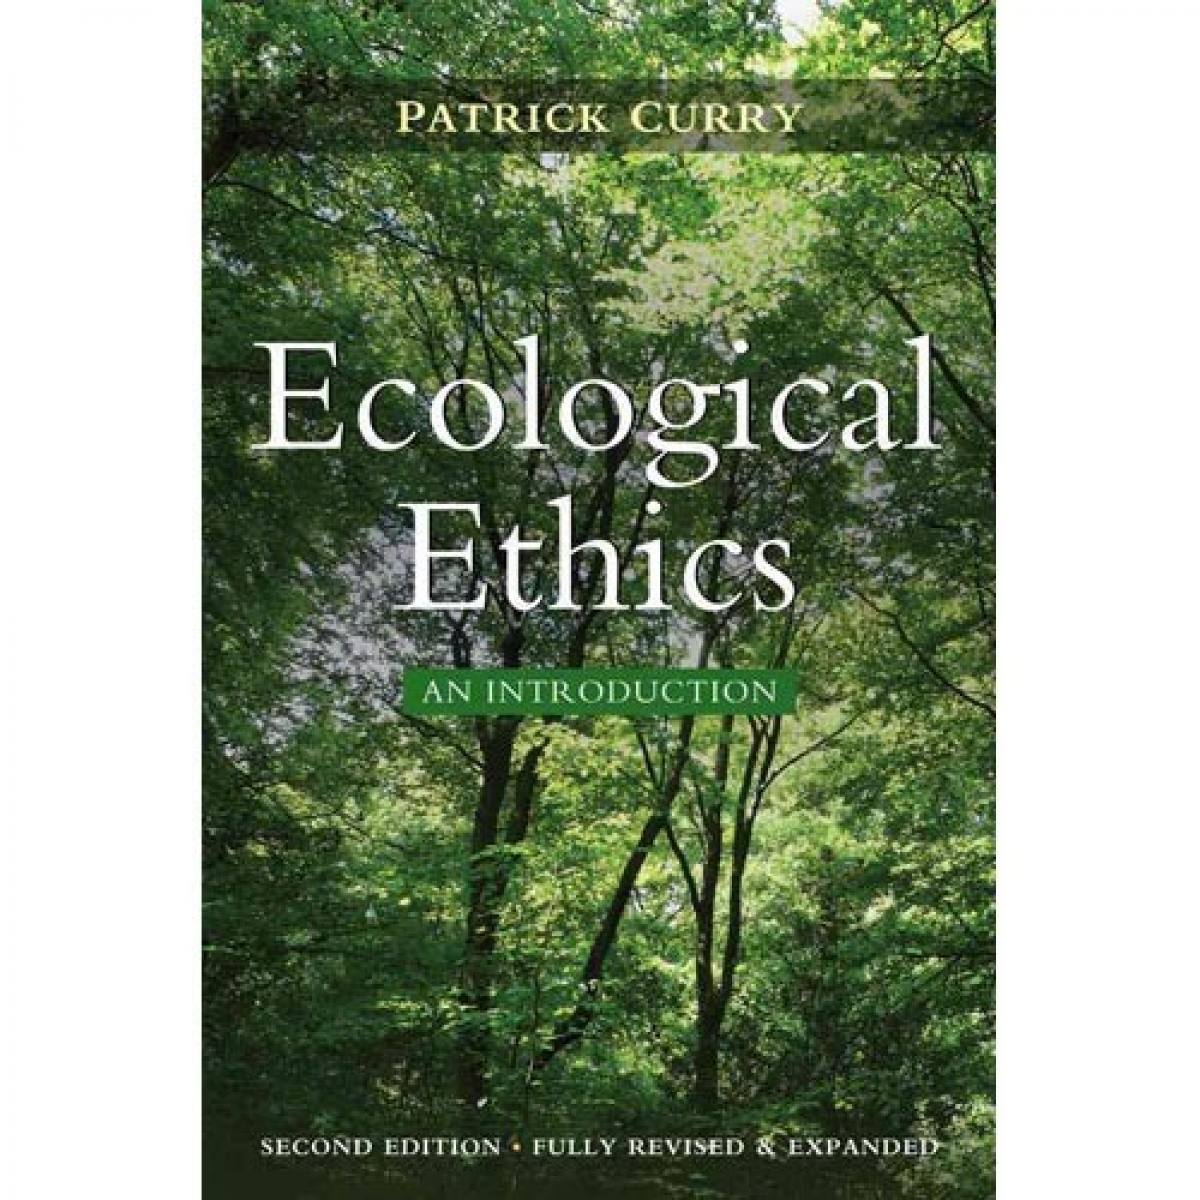 Curry Patrick Ecological Ethics: an introduction / P. Curry, A. Lamont, R. Joiner. - Wiley, 2011. - ISBN 9780745651262 